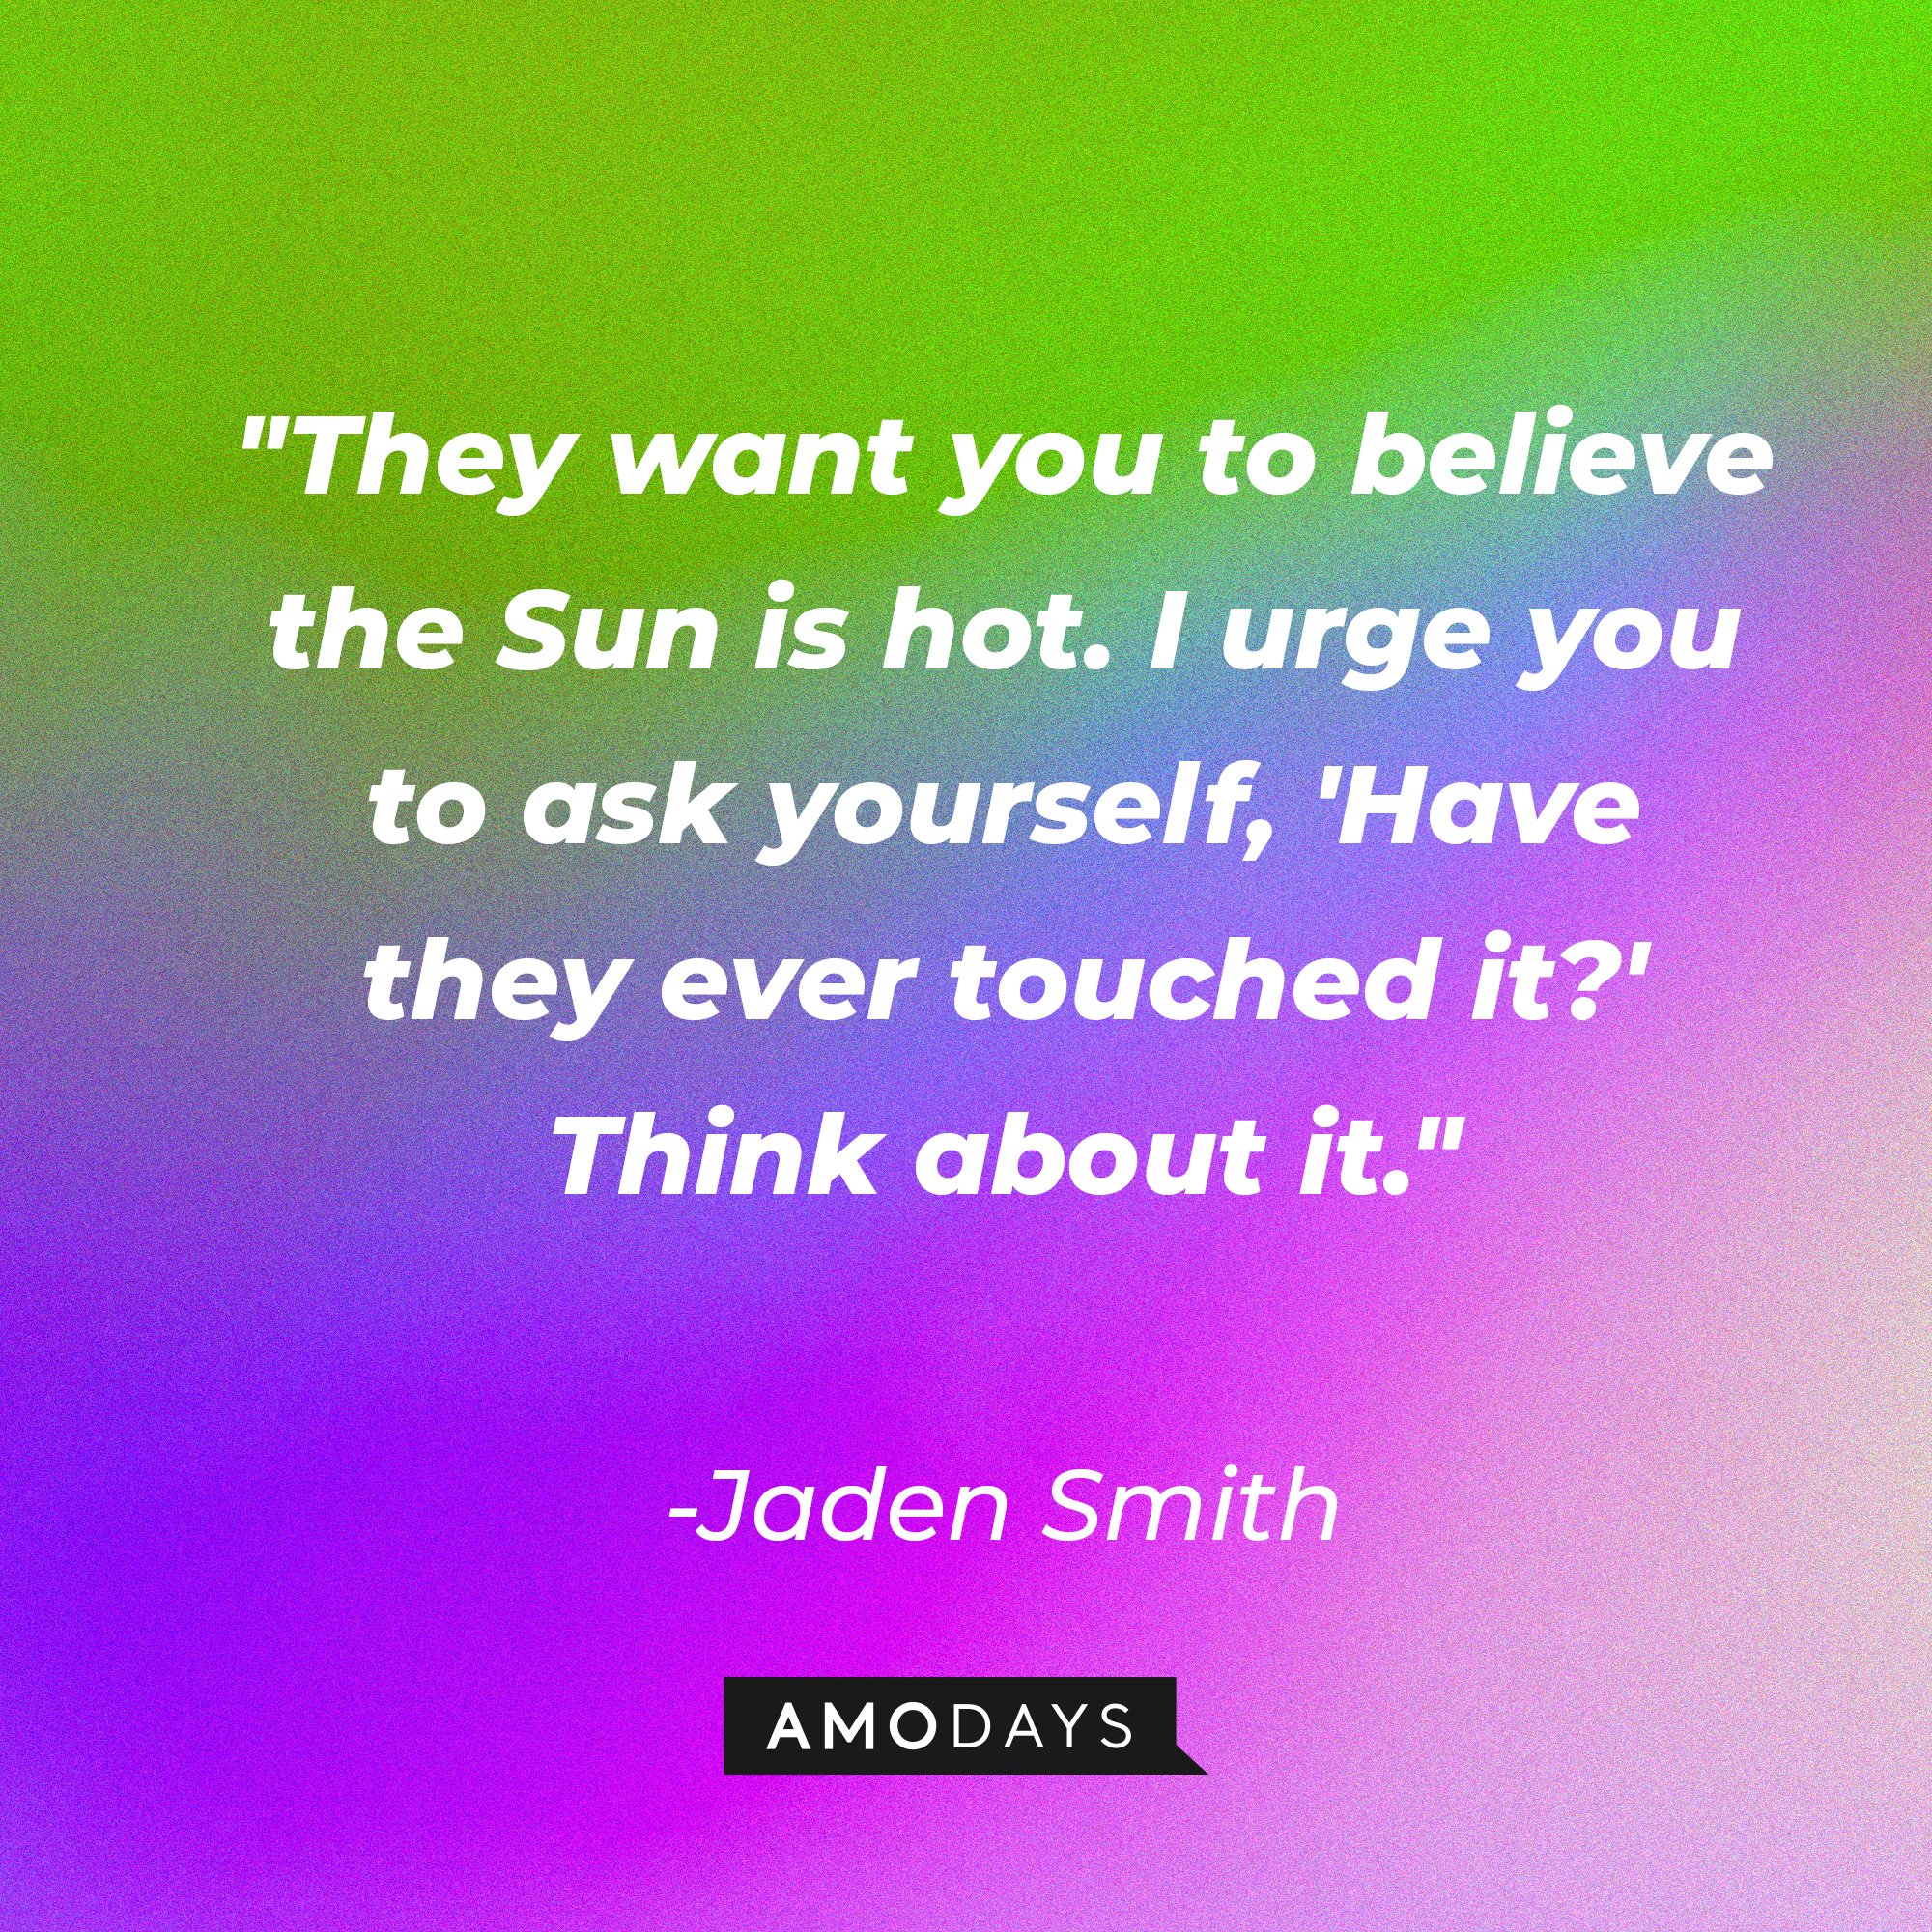 Jaden Smith's quote: "They want you to believe the Sun is hot. I urge you to ask yourself, 'Have they ever touched it?' Think about it." | Image: AmoDays